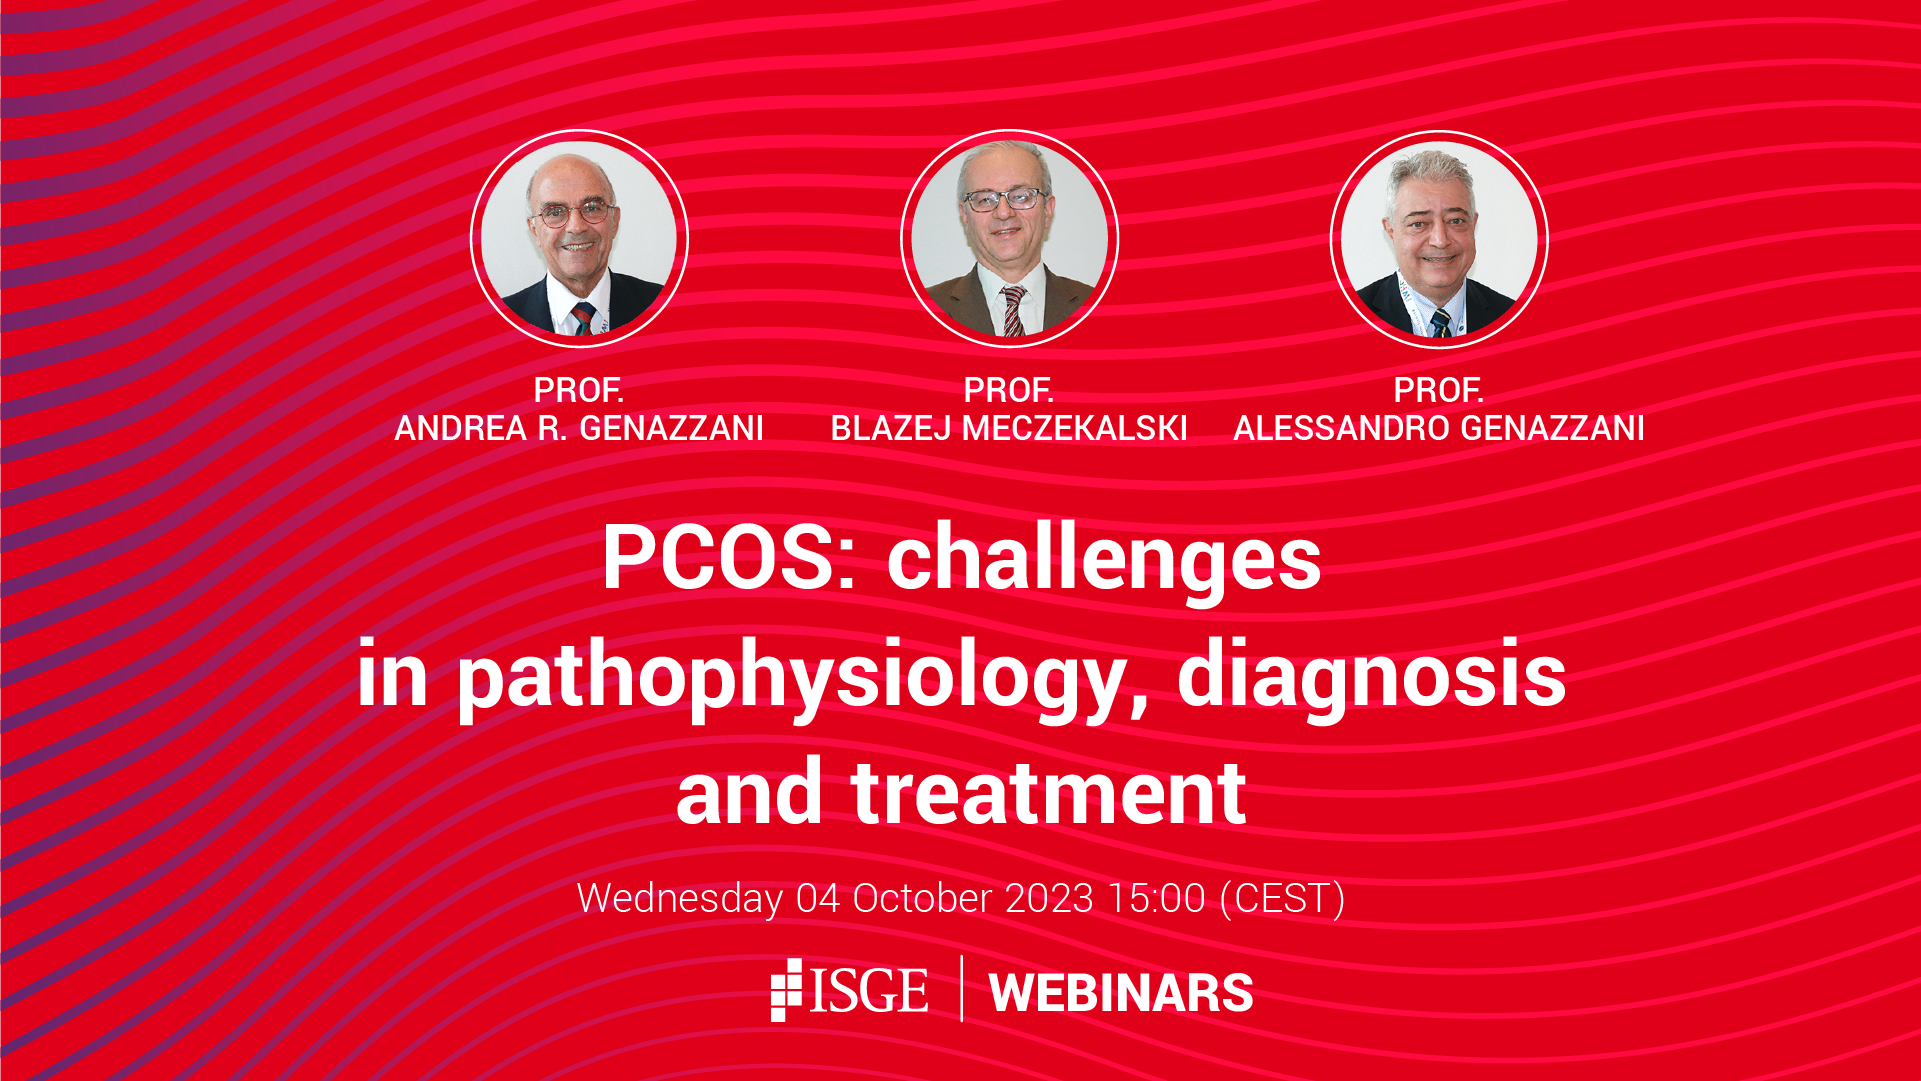 PCOS: challenges in pathophysiology, diagnosis and treatment